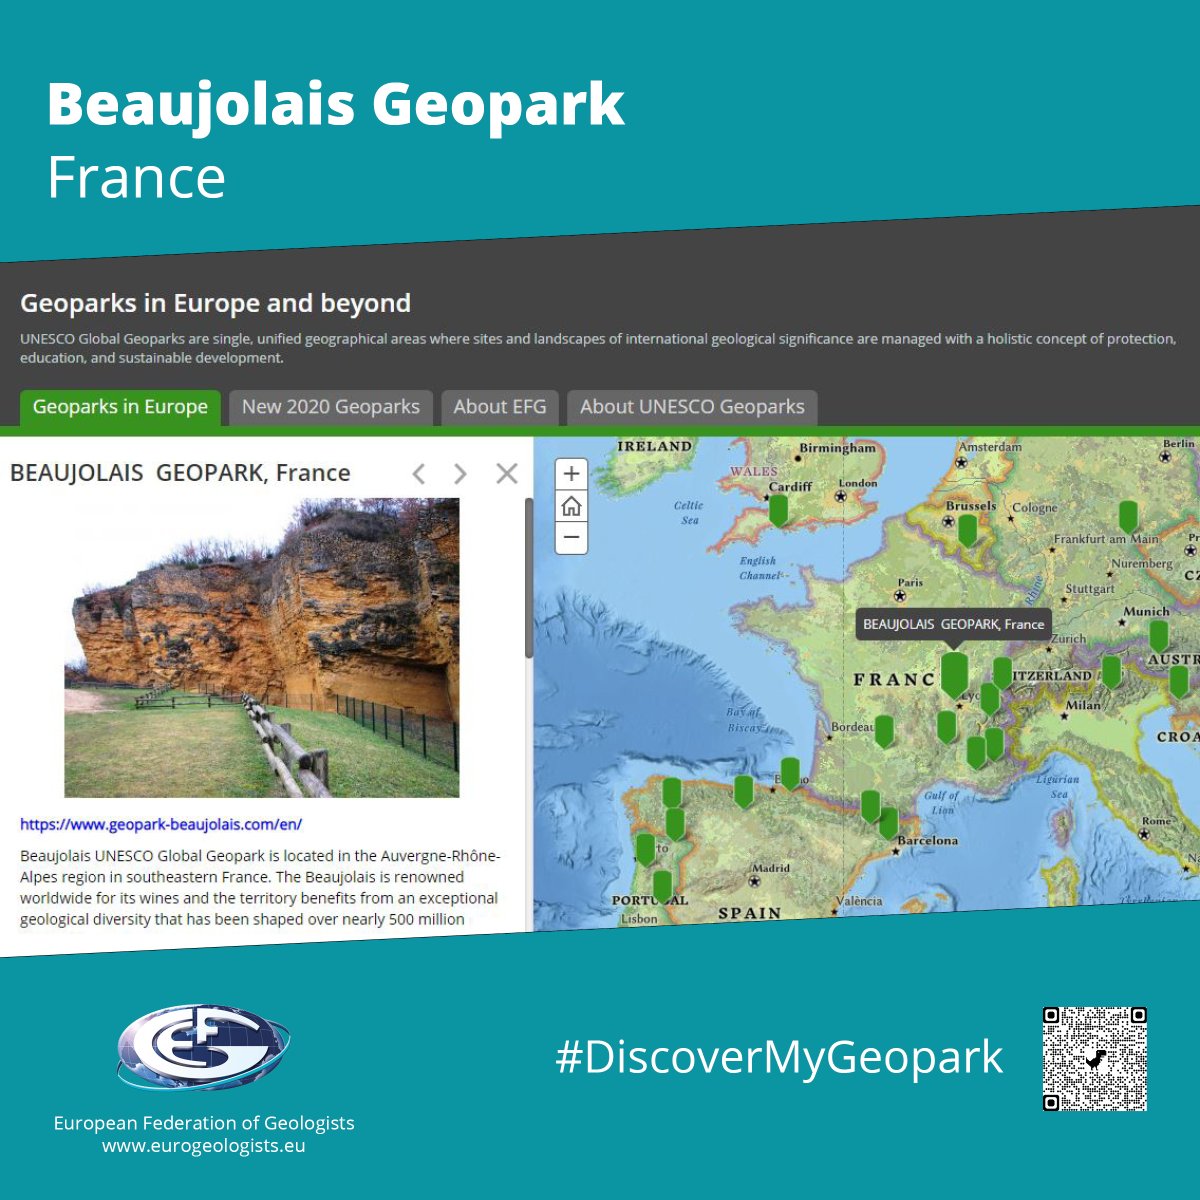 Next up is the Beaujolais @UNESCO Global Geopark in south-eastern France. The Beaujolais is renowned for its wines and the territory benefits from an exceptional geological diversity that has been shaped over nearly 500 million years. geopark-beaujolais.com #DiscoverMyGeopark